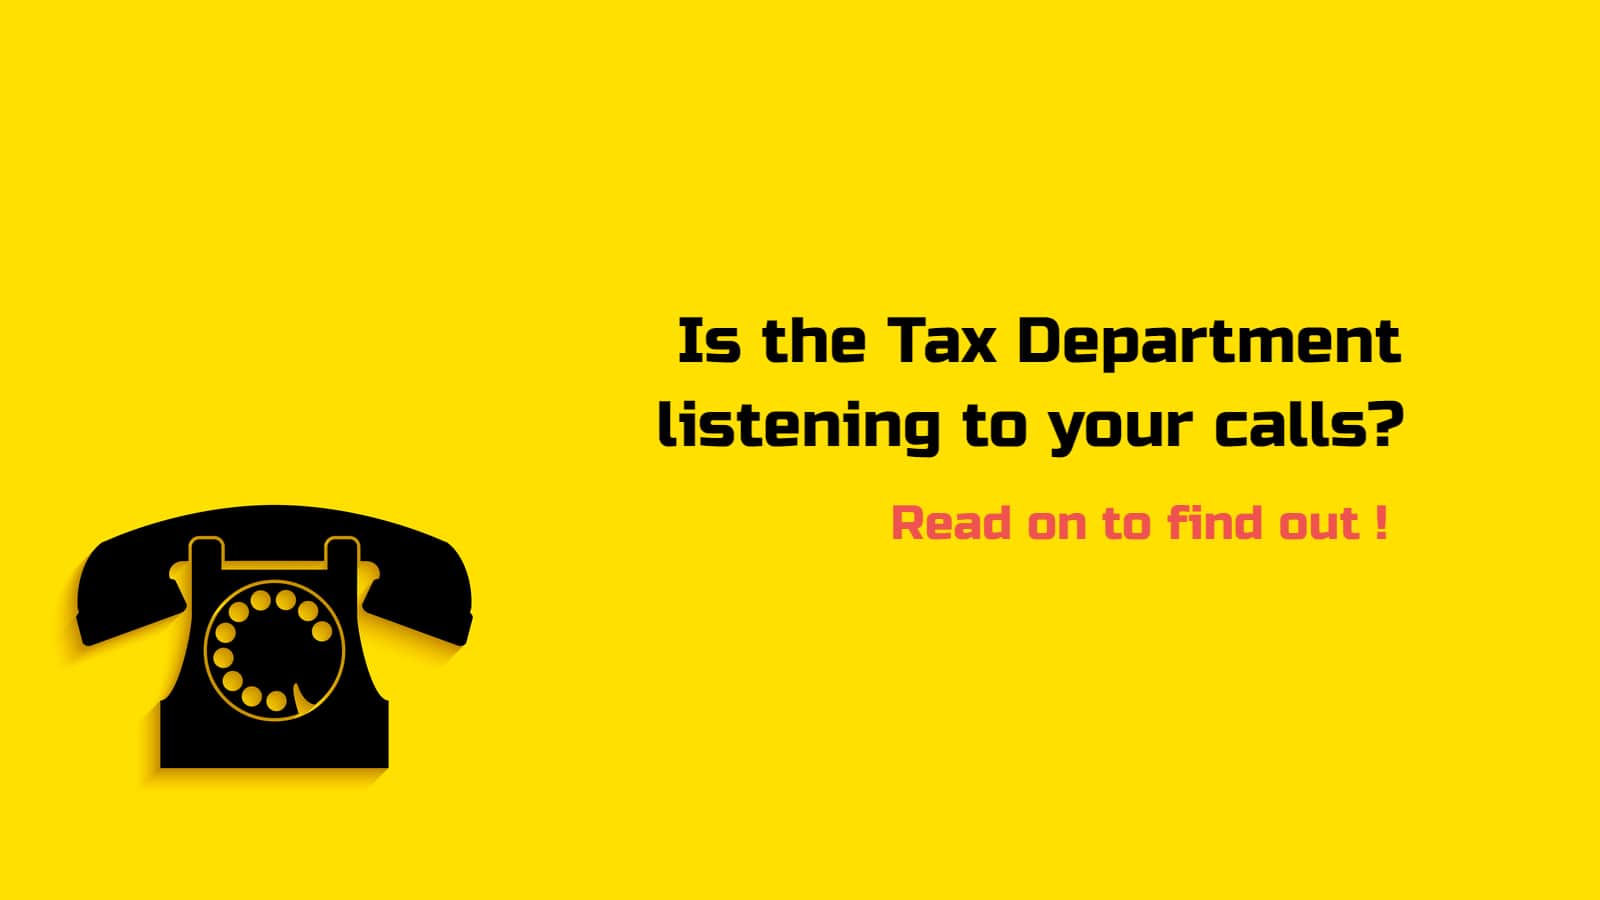 Is the Tax Department listening to your calls? Read on to find out!